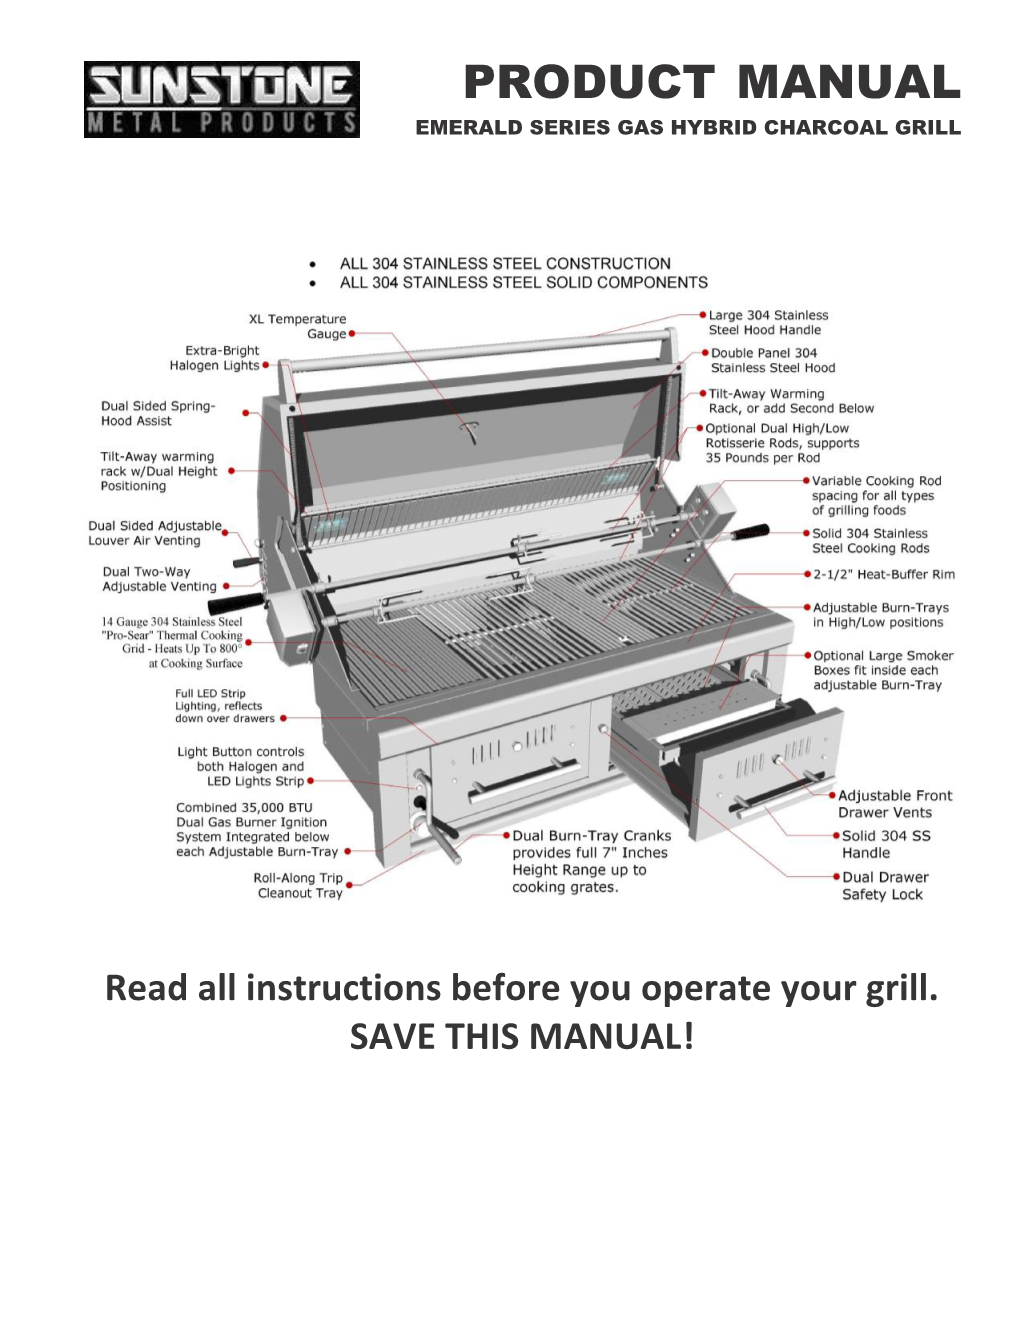 Product Manual Emerald Series Gas Hybrid Charcoal Grill